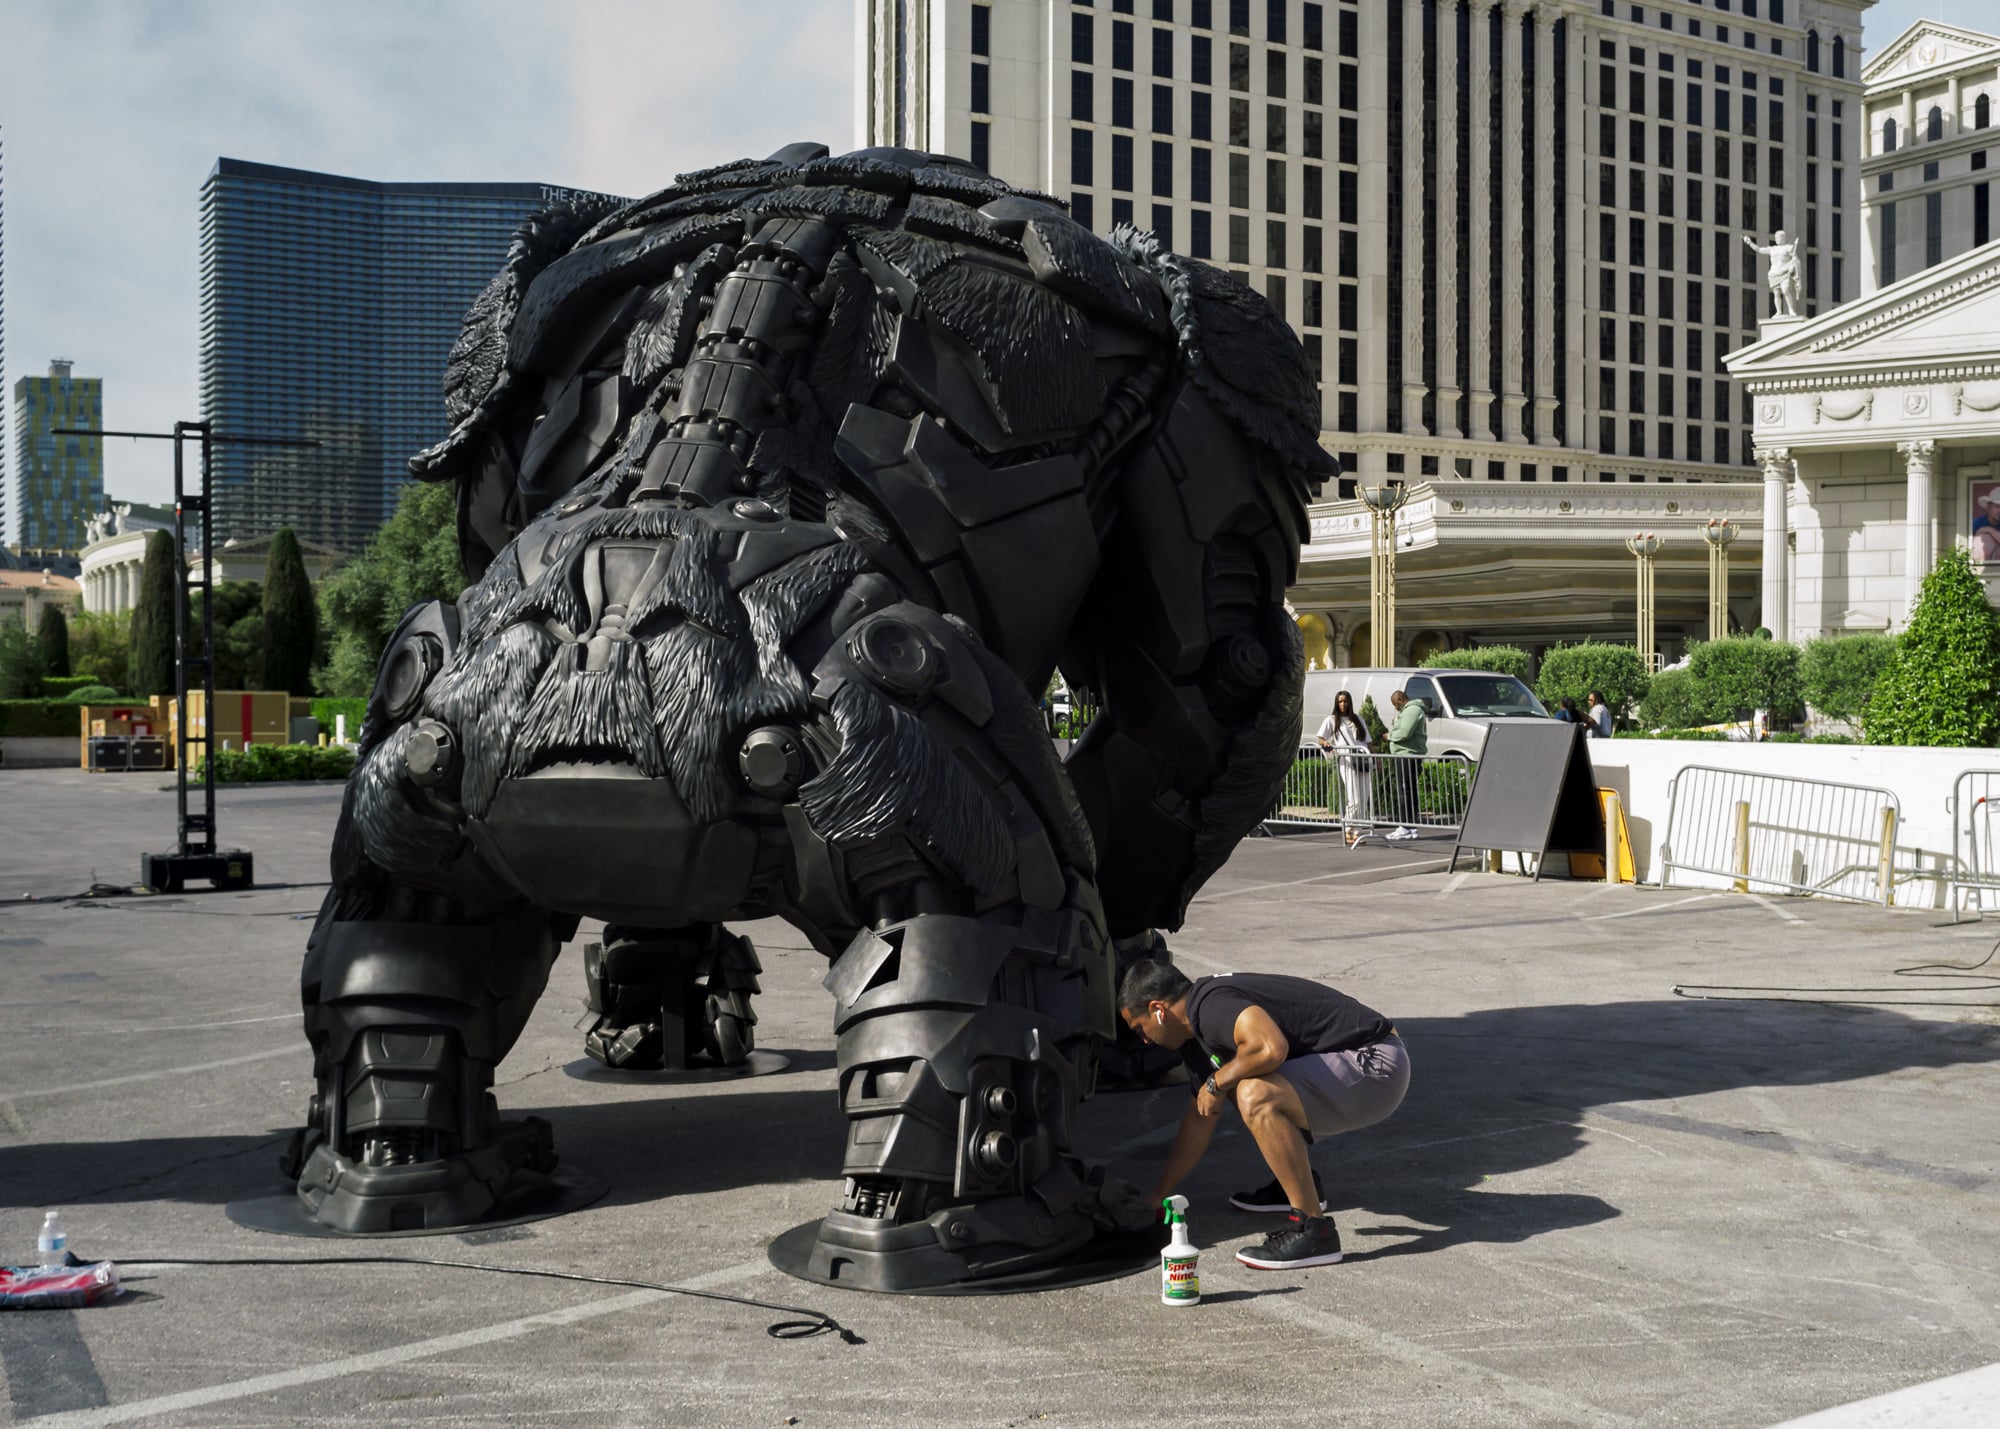 Las Vegas Street Photos: When Workers and Tourists Converge